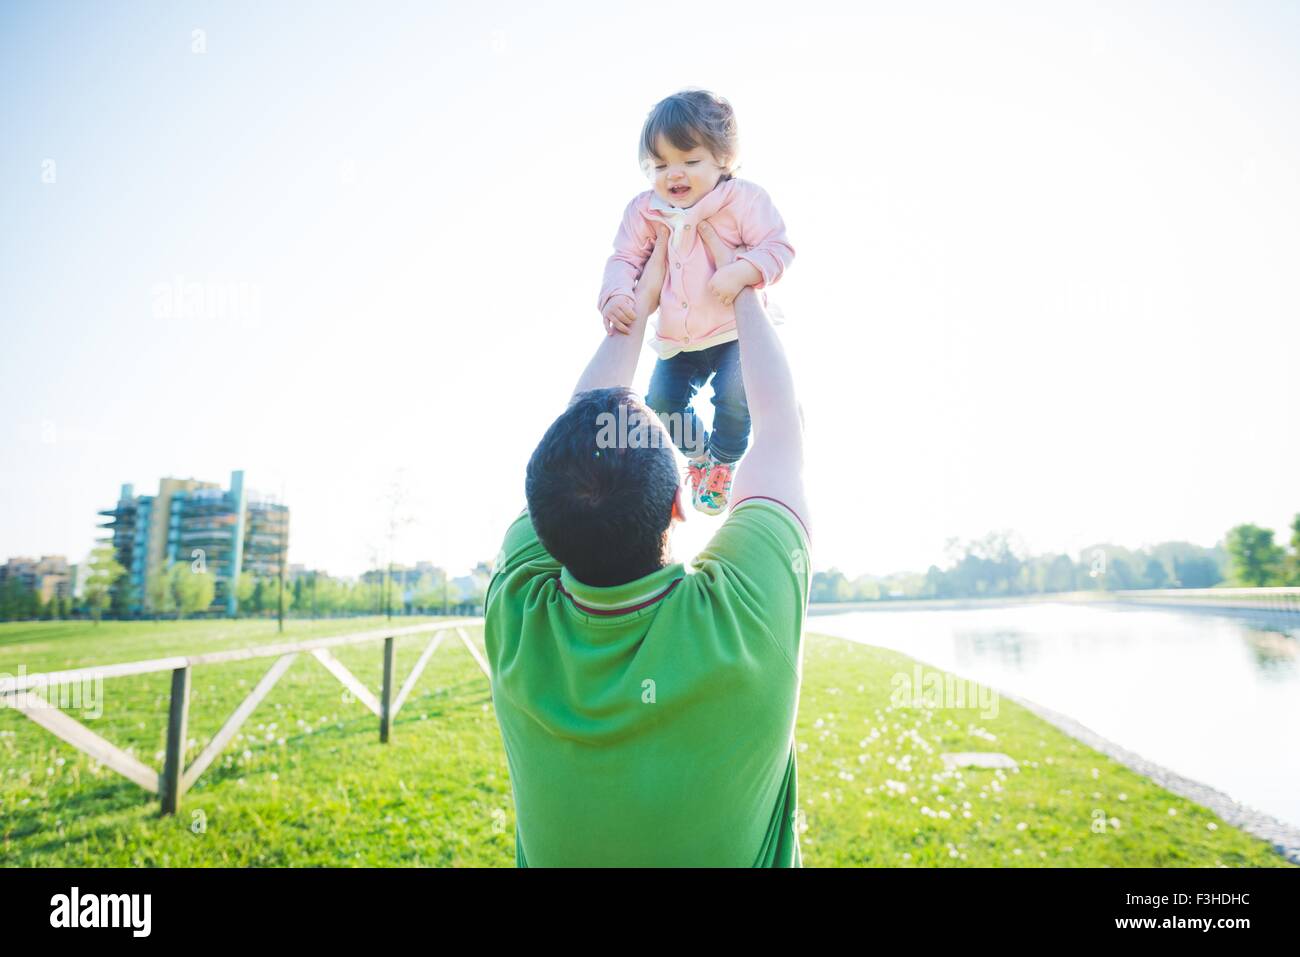 Mid adult man lifting up toddler daughter in park Stock Photo